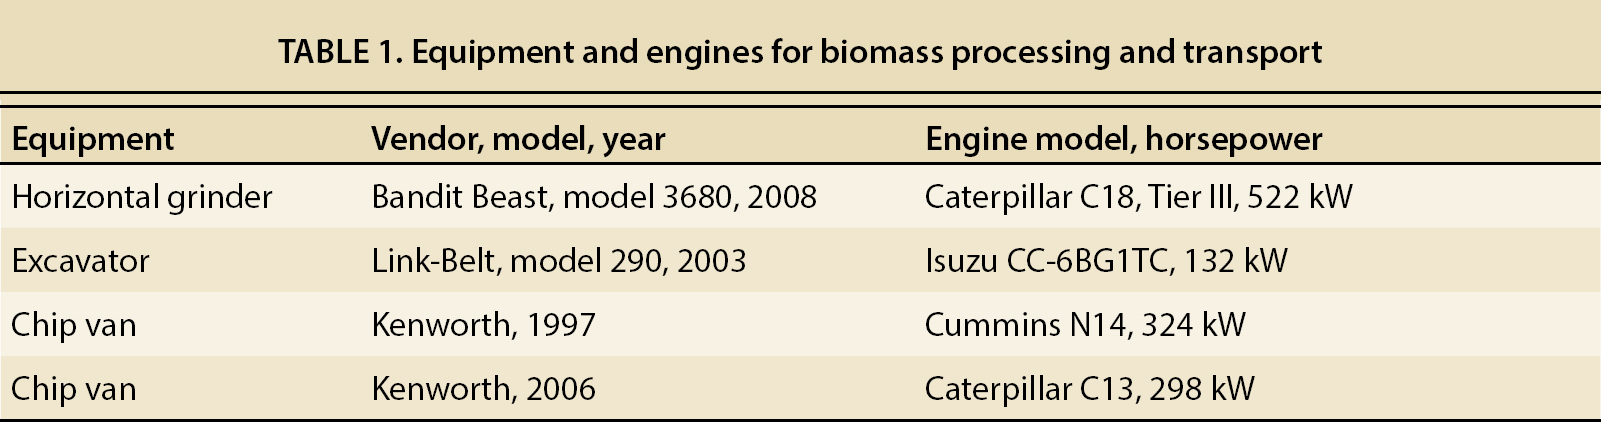 Equipment and engines for biomass processing and transport